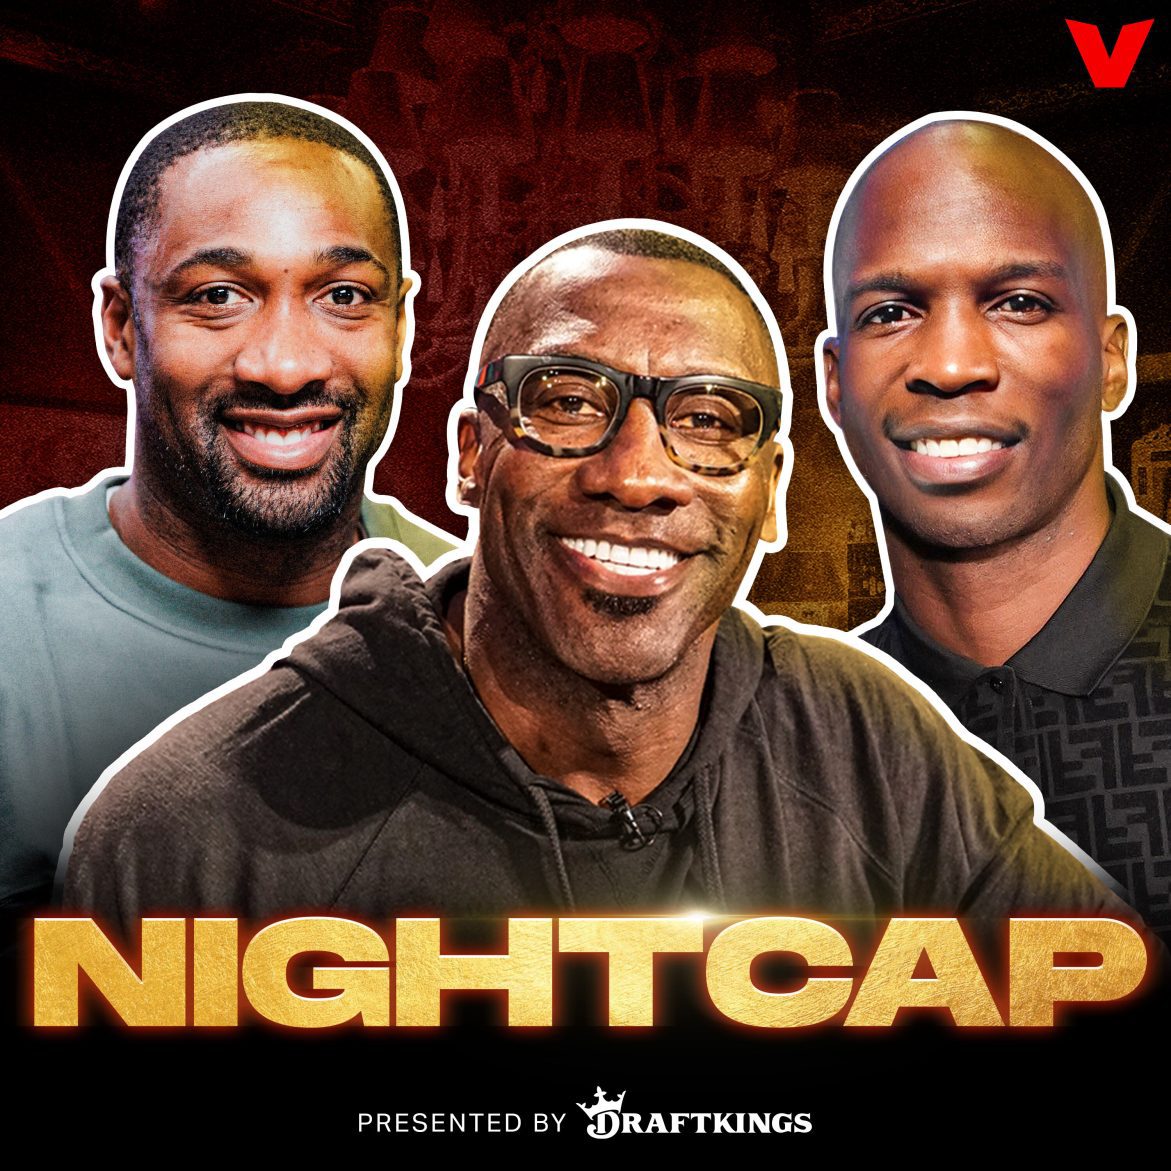 Black Podcasting - Nightcap - Hour 2: Steph Curry gives Unc his shoes + Fan questions